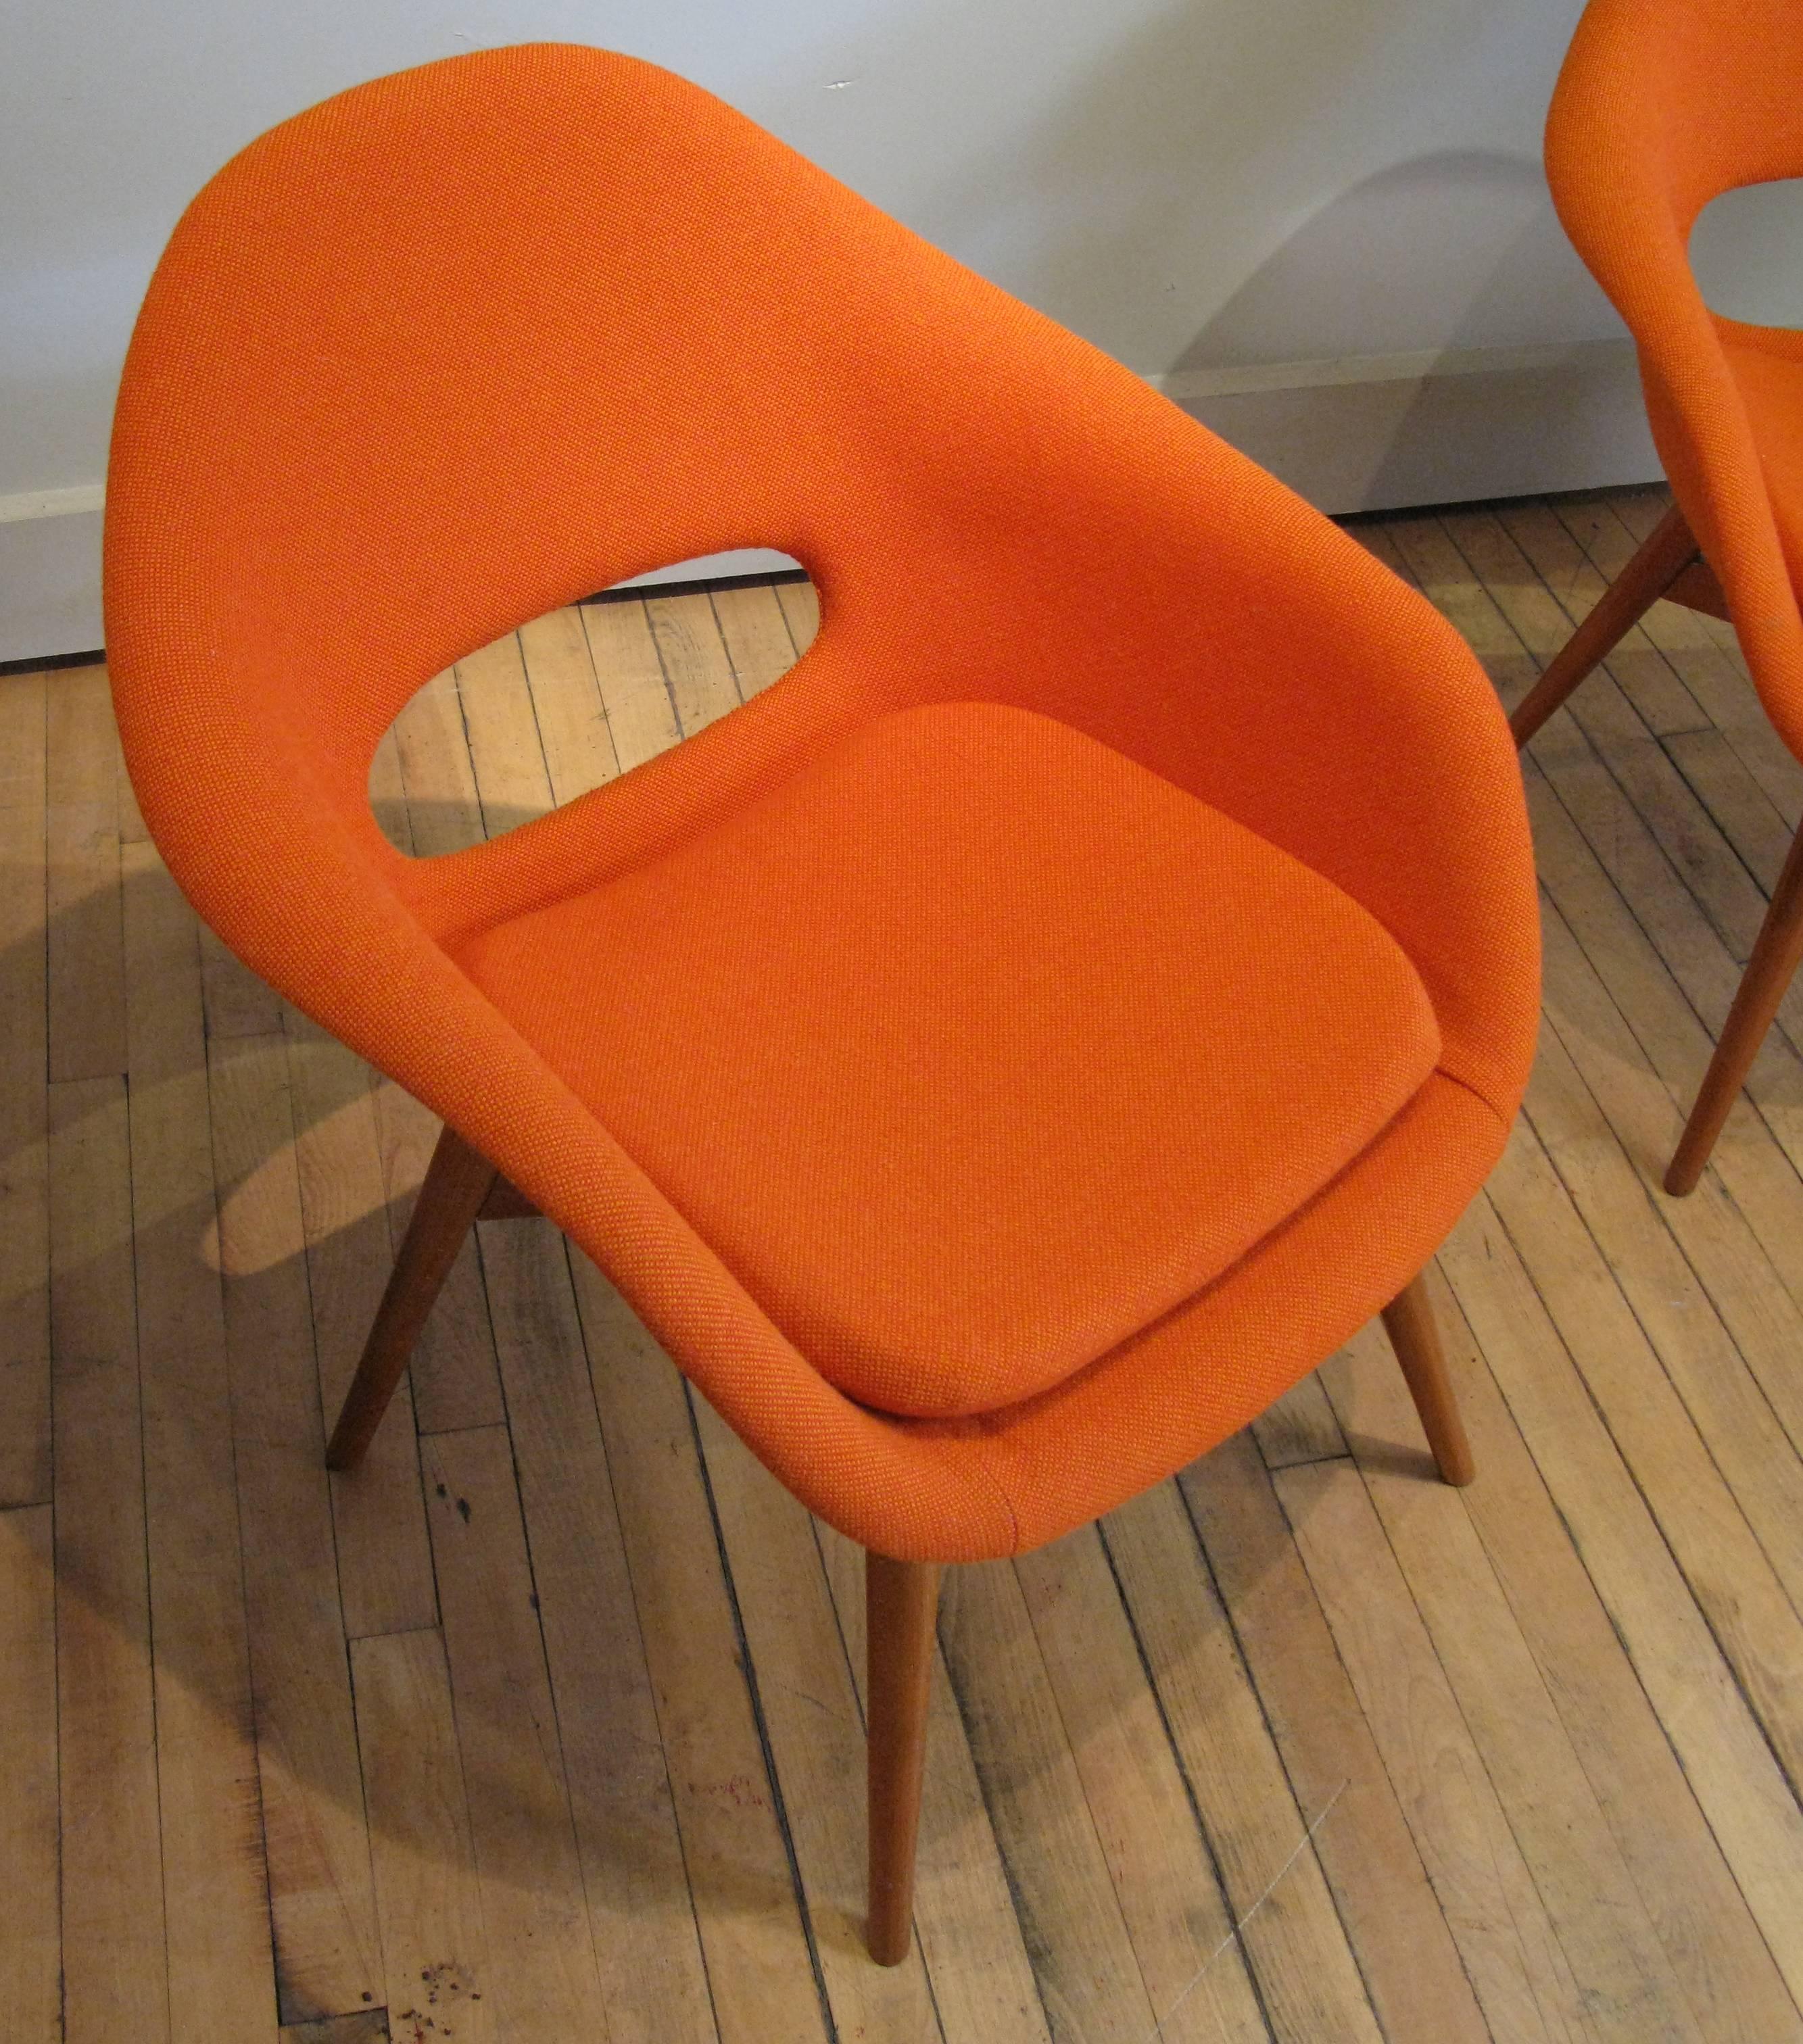 A beautiful, stylish and comfortable pair of 1960s lounge chairs with birch bases designed by Miroslav Navratil. Great design with an open cut out in the back, these have been reupholstered in an orange Kravat fabric.